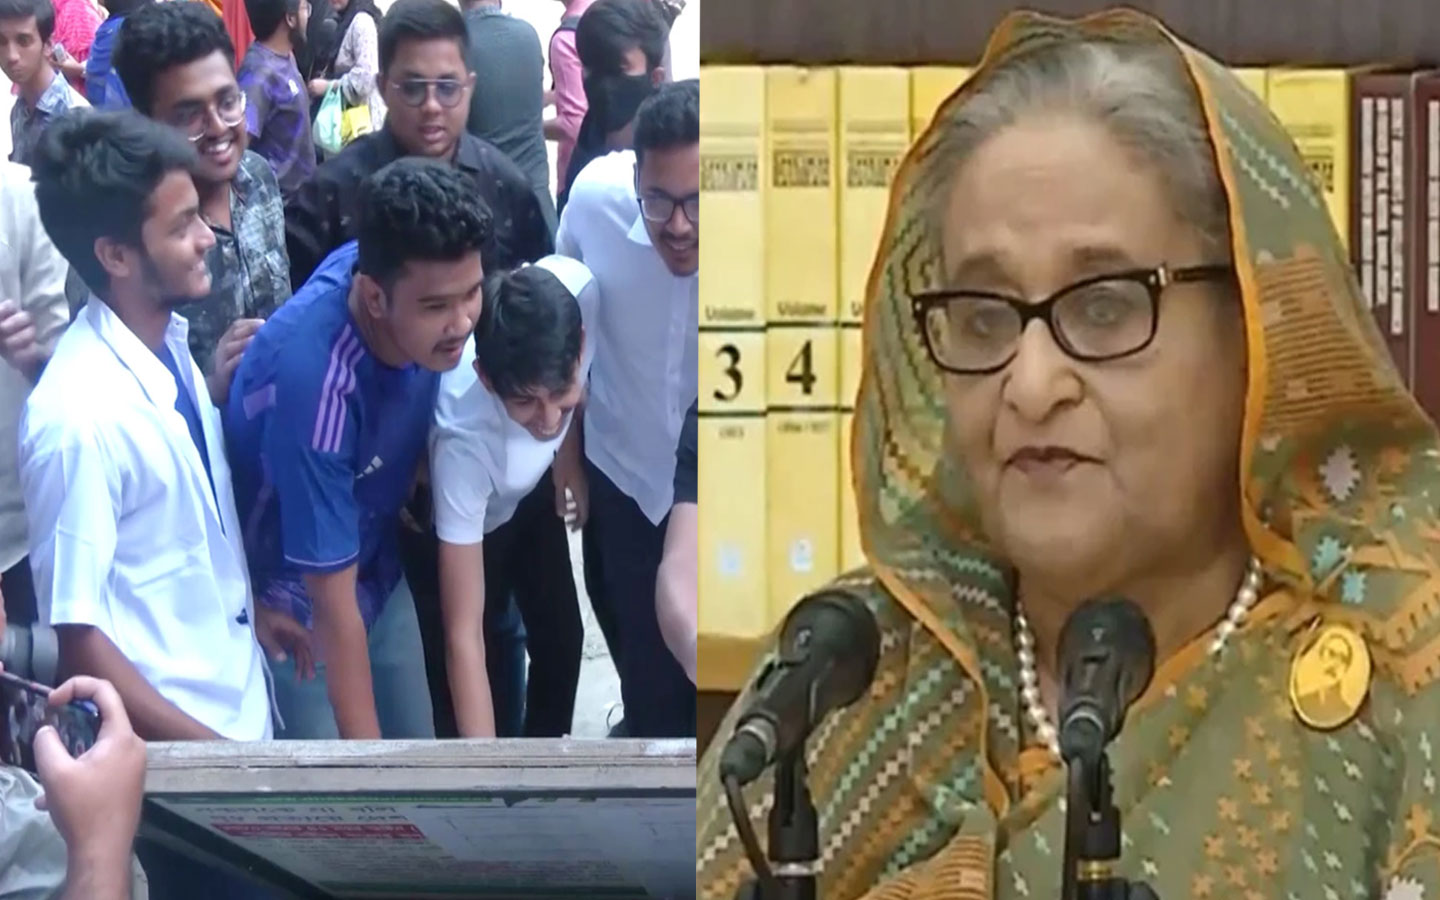 Results of Madhyamik and equivalent board exams out in Bangladesh, PM Sheikh Hasina announced